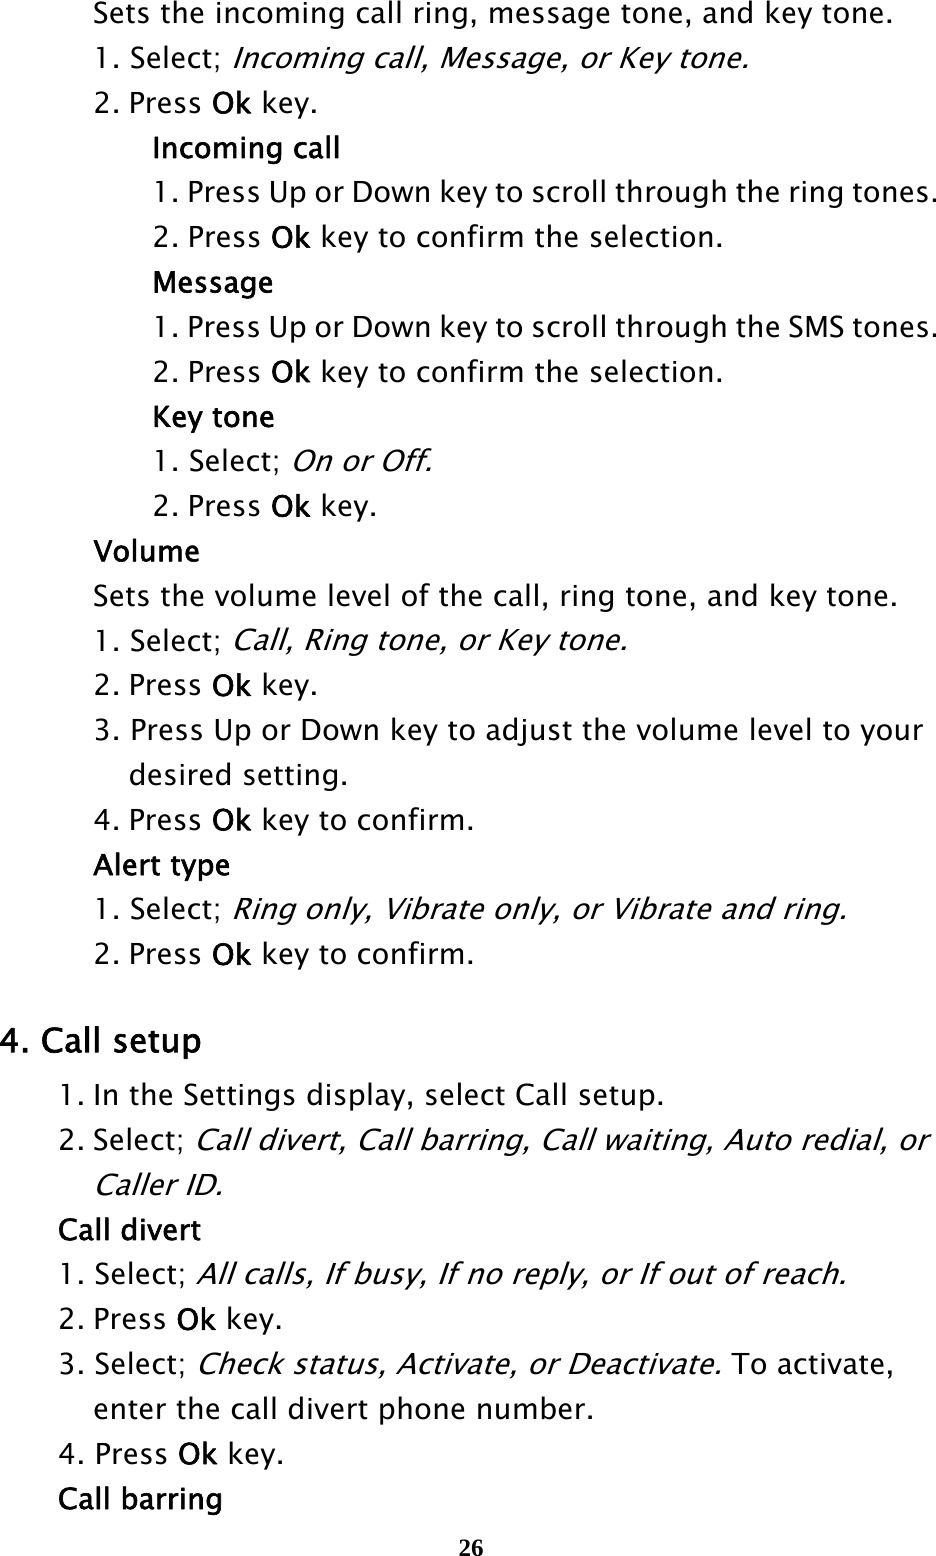  26    Sets the incoming call ring, message tone, and key tone.   1. Select; Incoming call, Message, or Key tone.   2. Press Ok key.    Incoming call       1. Press Up or Down key to scroll through the ring tones.      2. Press Ok key to confirm the selection.    Message       1. Press Up or Down key to scroll through the SMS tones.     2. Press Ok key to confirm the selection.    Key tone    1. Select; On or Off.     2. Press Ok key.    Volume     Sets the volume level of the call, ring tone, and key tone.   1. Select; Call, Ring tone, or Key tone.   2. Press Ok key.     3. Press Up or Down key to adjust the volume level to your       desired setting.   4. Press Ok key to confirm.    Alert type   1. Select; Ring only, Vibrate only, or Vibrate and ring.   2. Press Ok key to confirm.  4. Call setup   1. In the Settings display, select Call setup.  2. Select; Call divert, Call barring, Call waiting, Auto redial, or     Caller ID.  Call divert  1. Select; All calls, If busy, If no reply, or If out of reach.    2. Press Ok key.  3. Select; Check status, Activate, or Deactivate. To activate,       enter the call divert phone number.  4. Press Ok key.  Call barring 